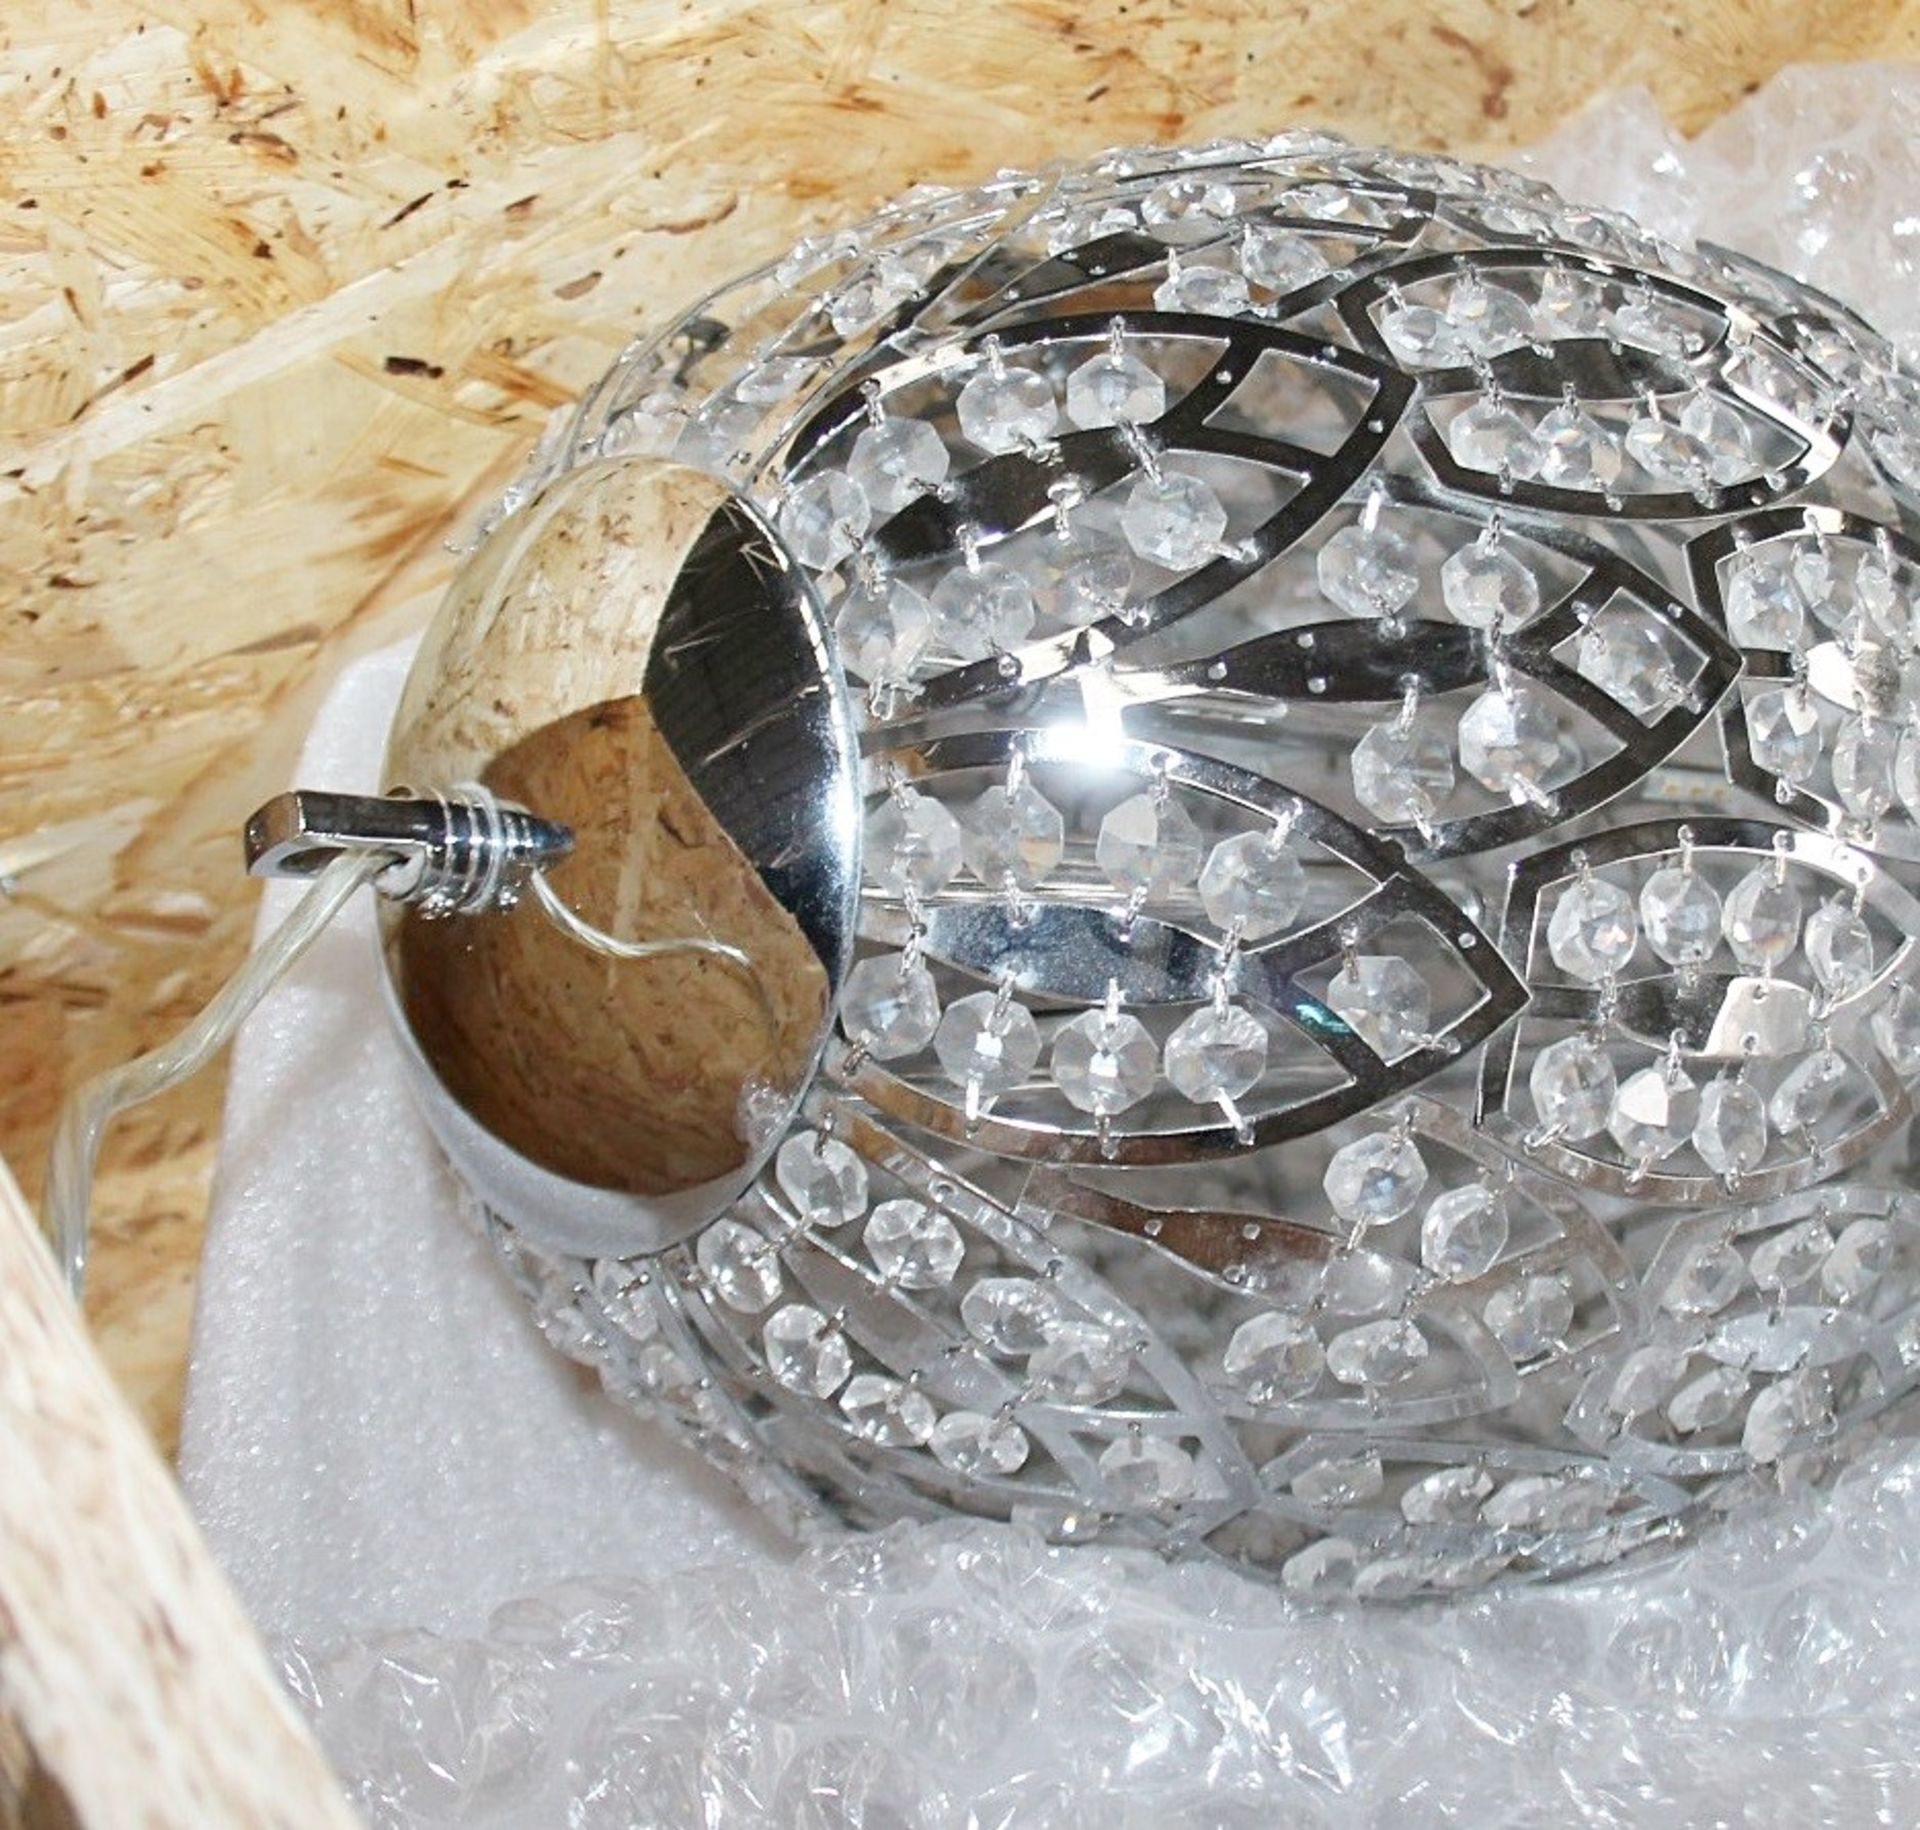 1 x High-end Italian LED Egg-Shaped Light Fitting Encrusted In Premium ASFOUR Crystal - RRP £4,000 - Image 8 of 9